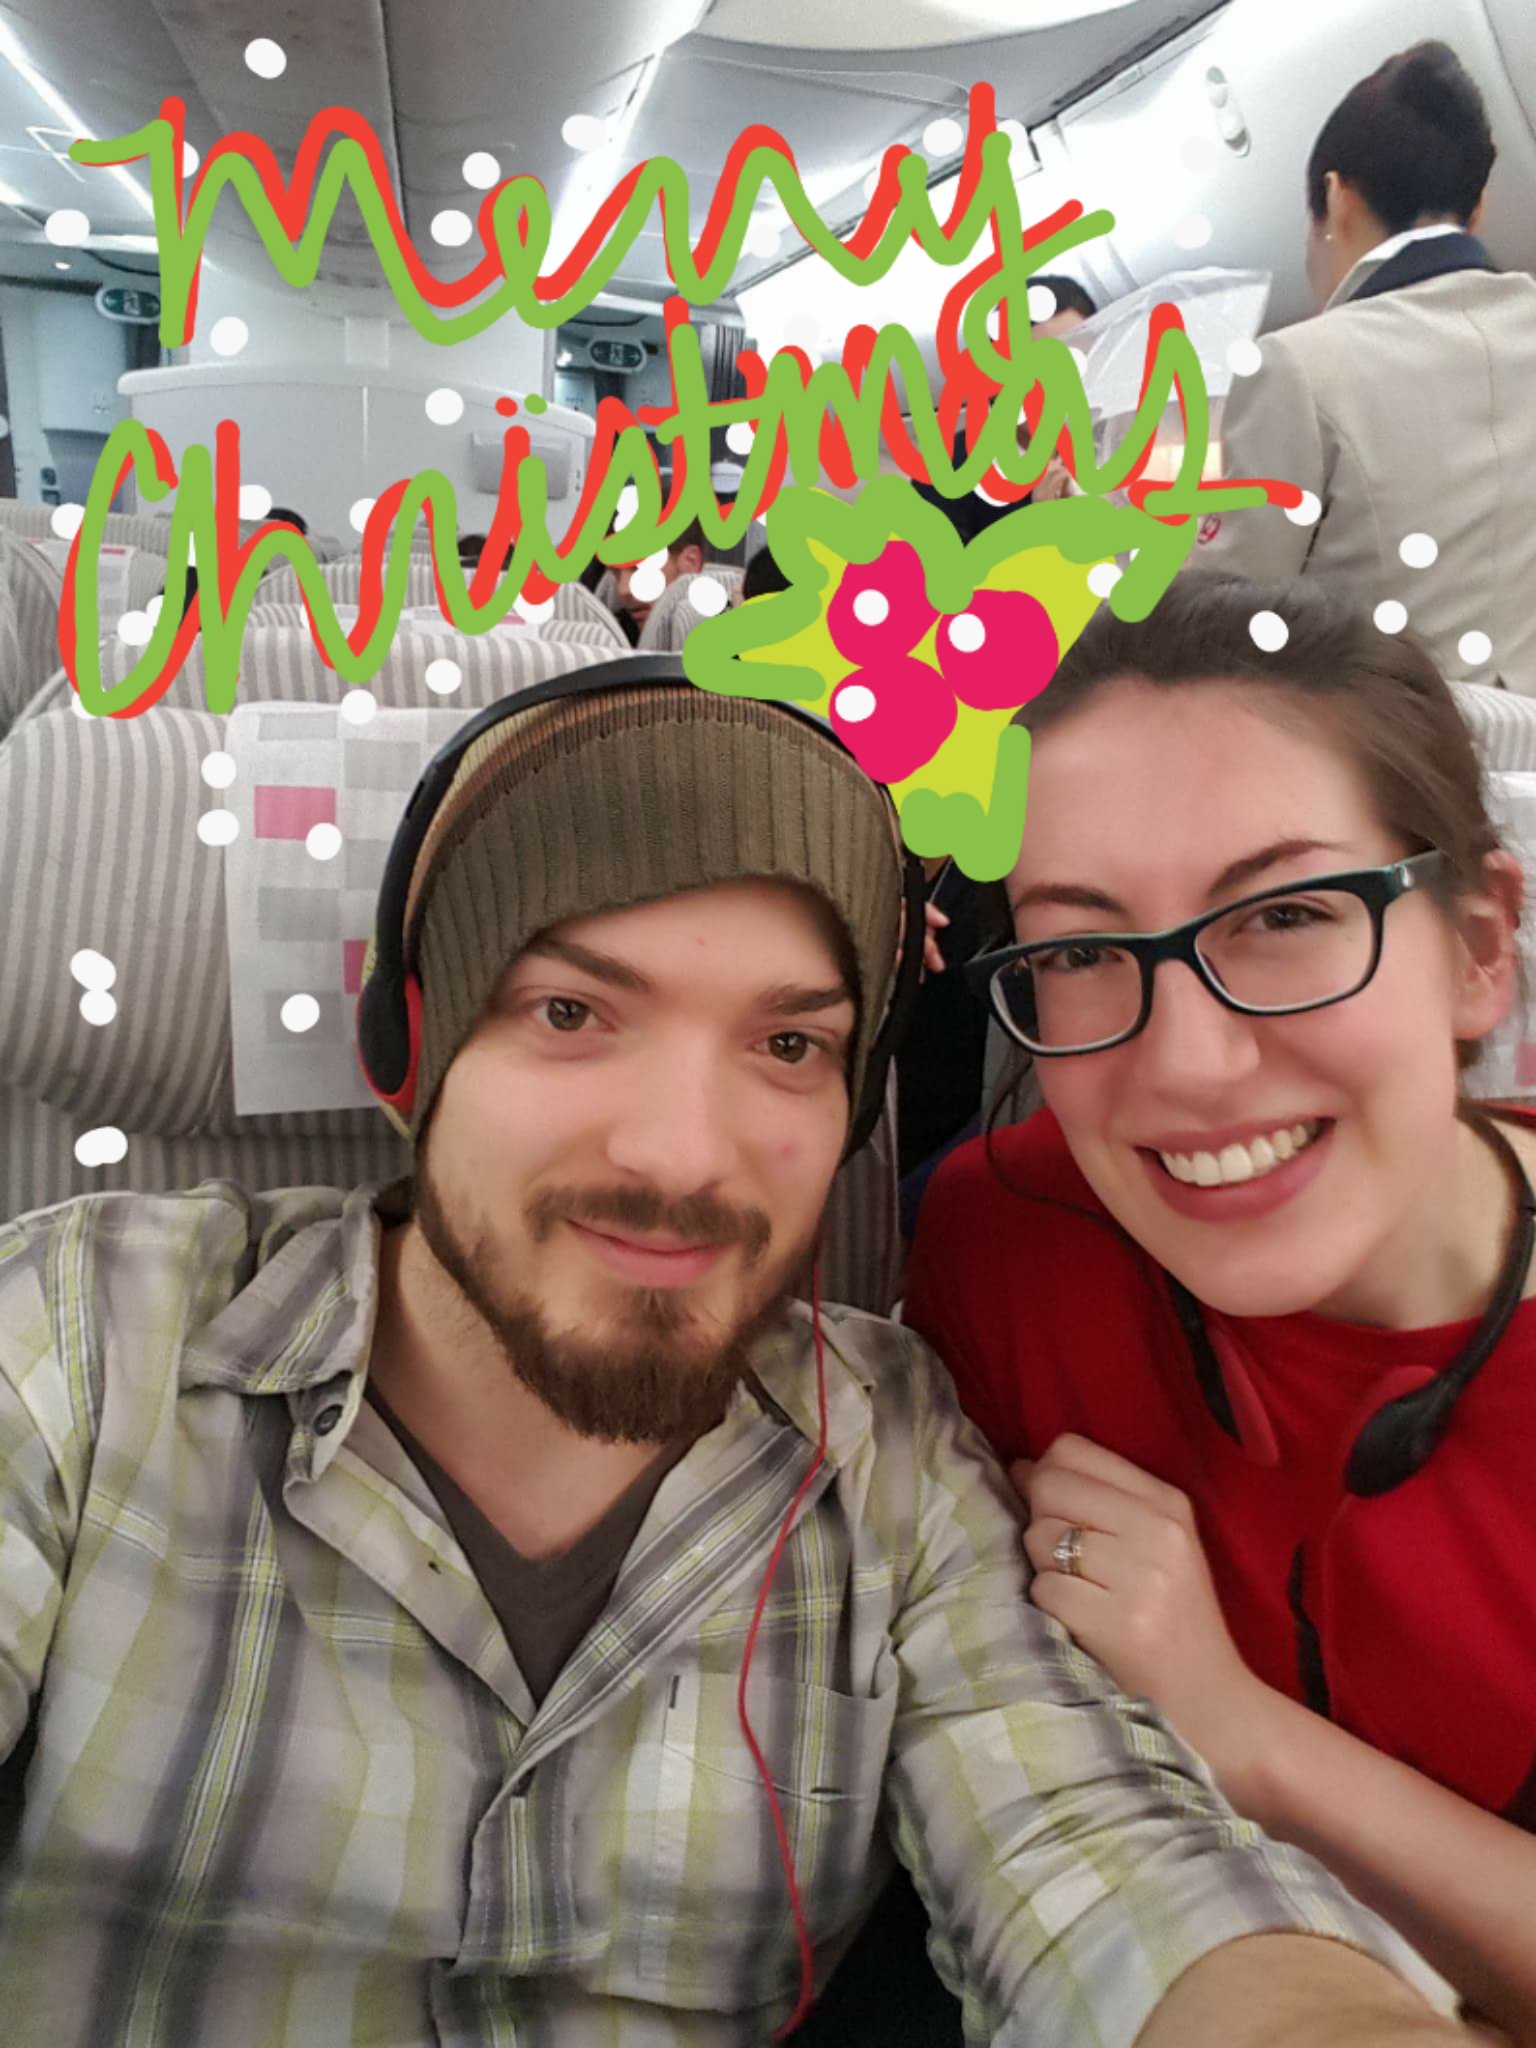 A lil' post departure selfie. America here we come! Merry Christmas!